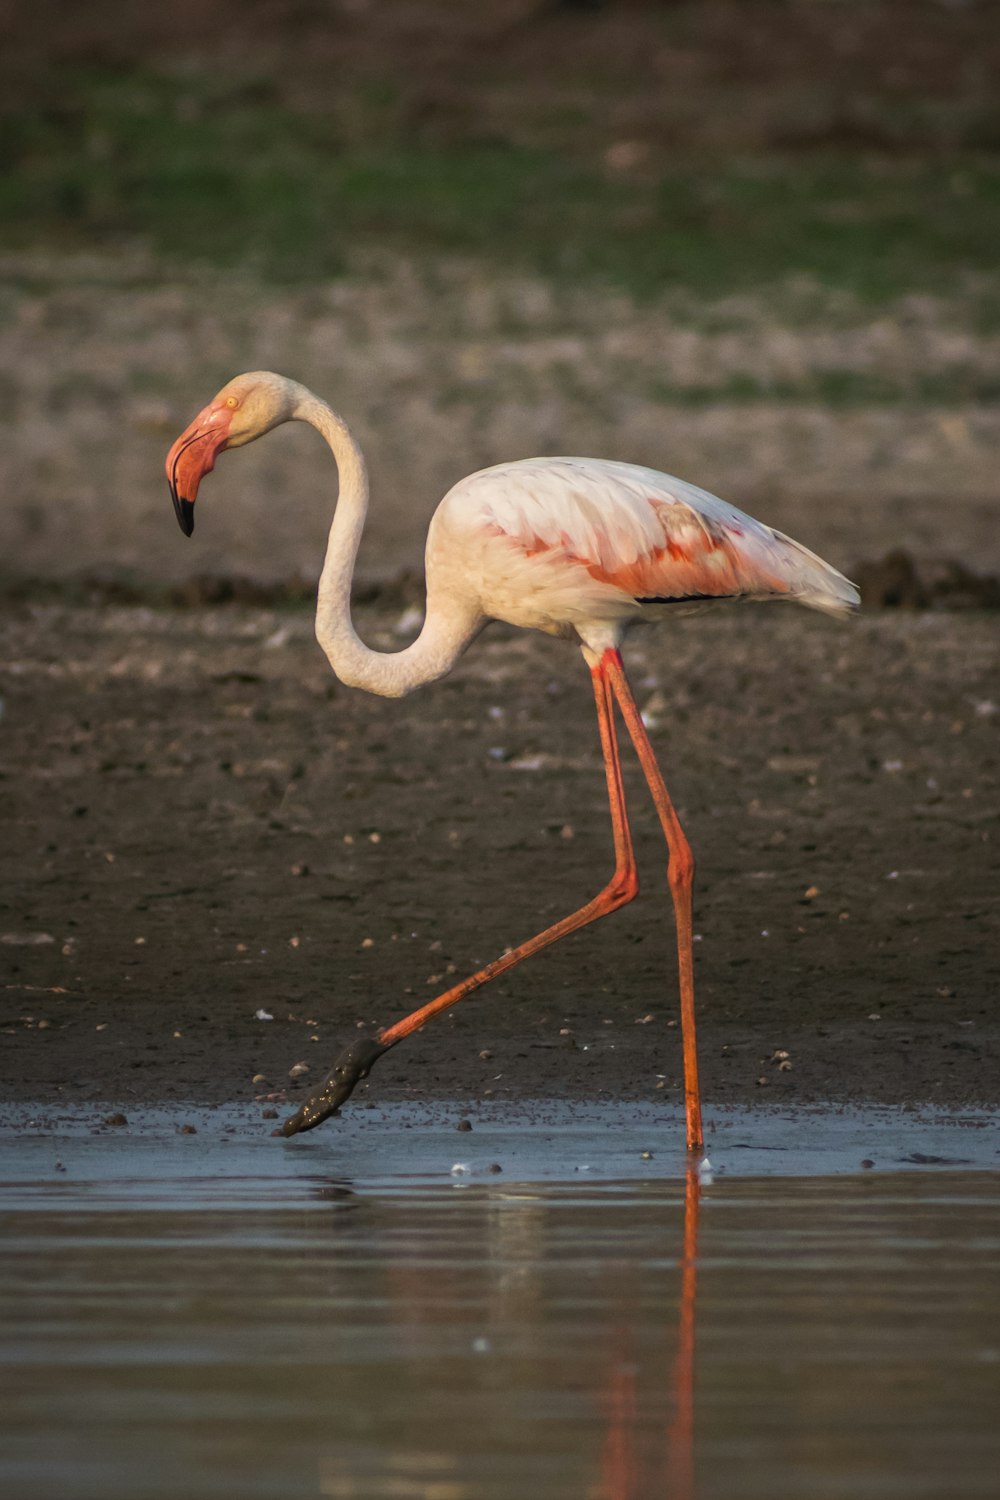 pink flamingo on body of water during daytime